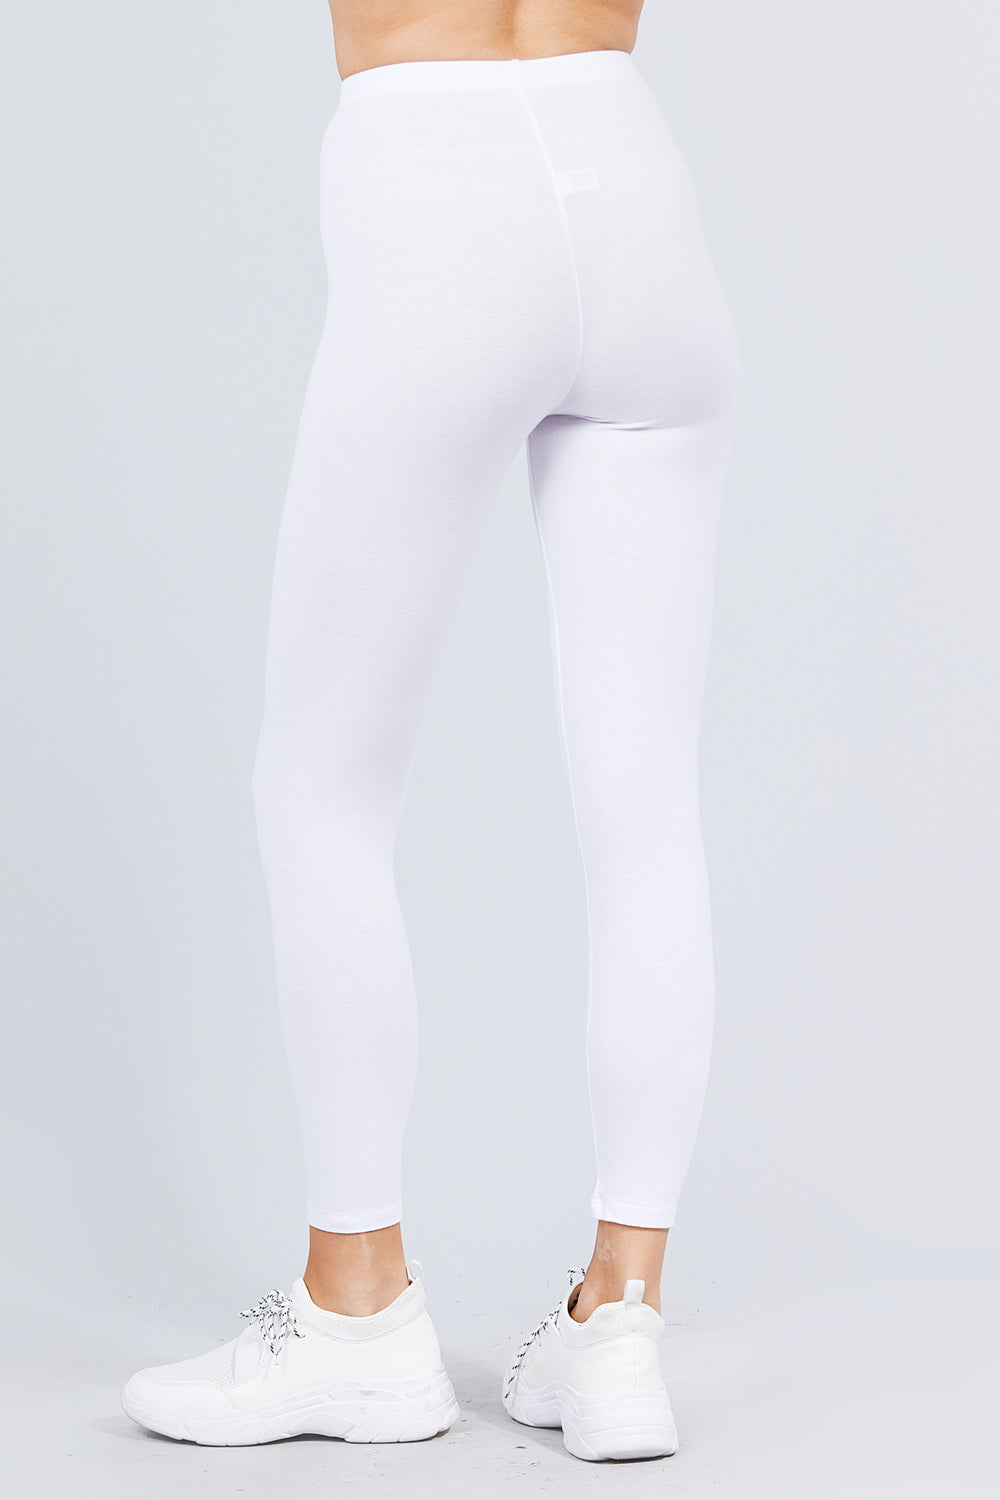 Buy Lyra Ankle Length Ethnic Wear Legging (Light Blue, White, Solid) at  Amazon.in